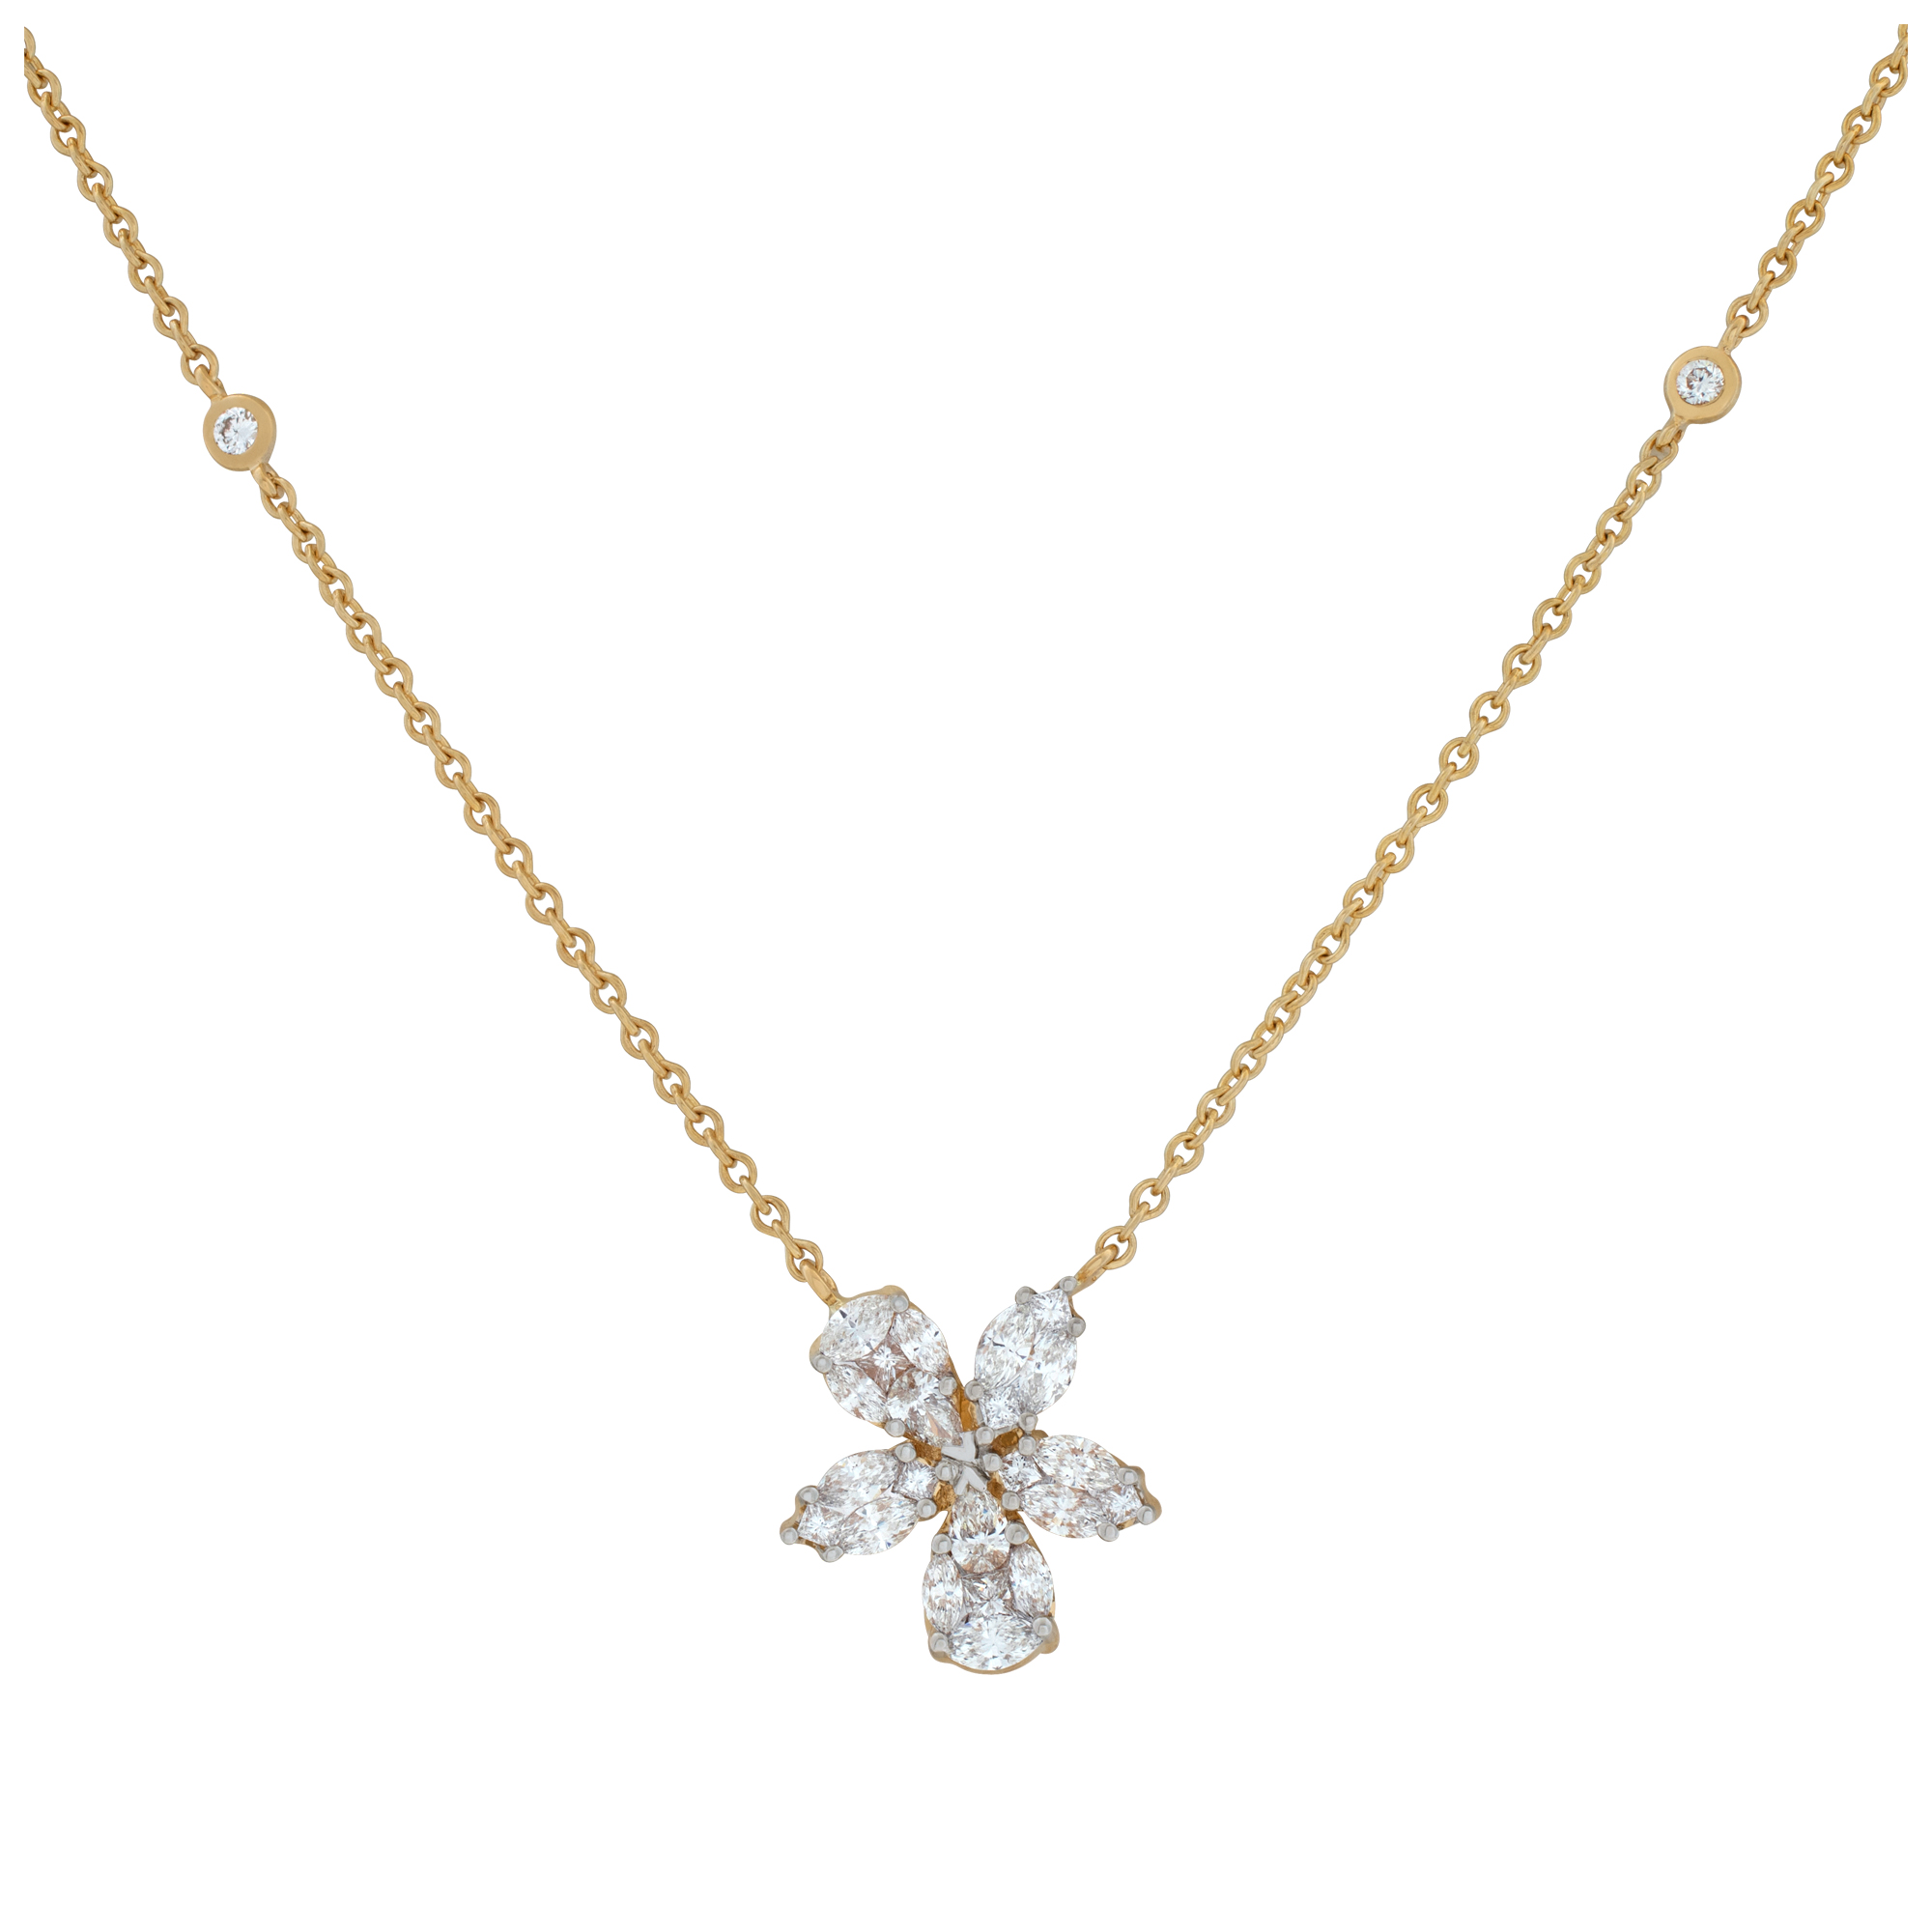 Illusion set diamond flower pendant in 18k yellow gold with 1.14 carat in diamonds. 18 inch length.